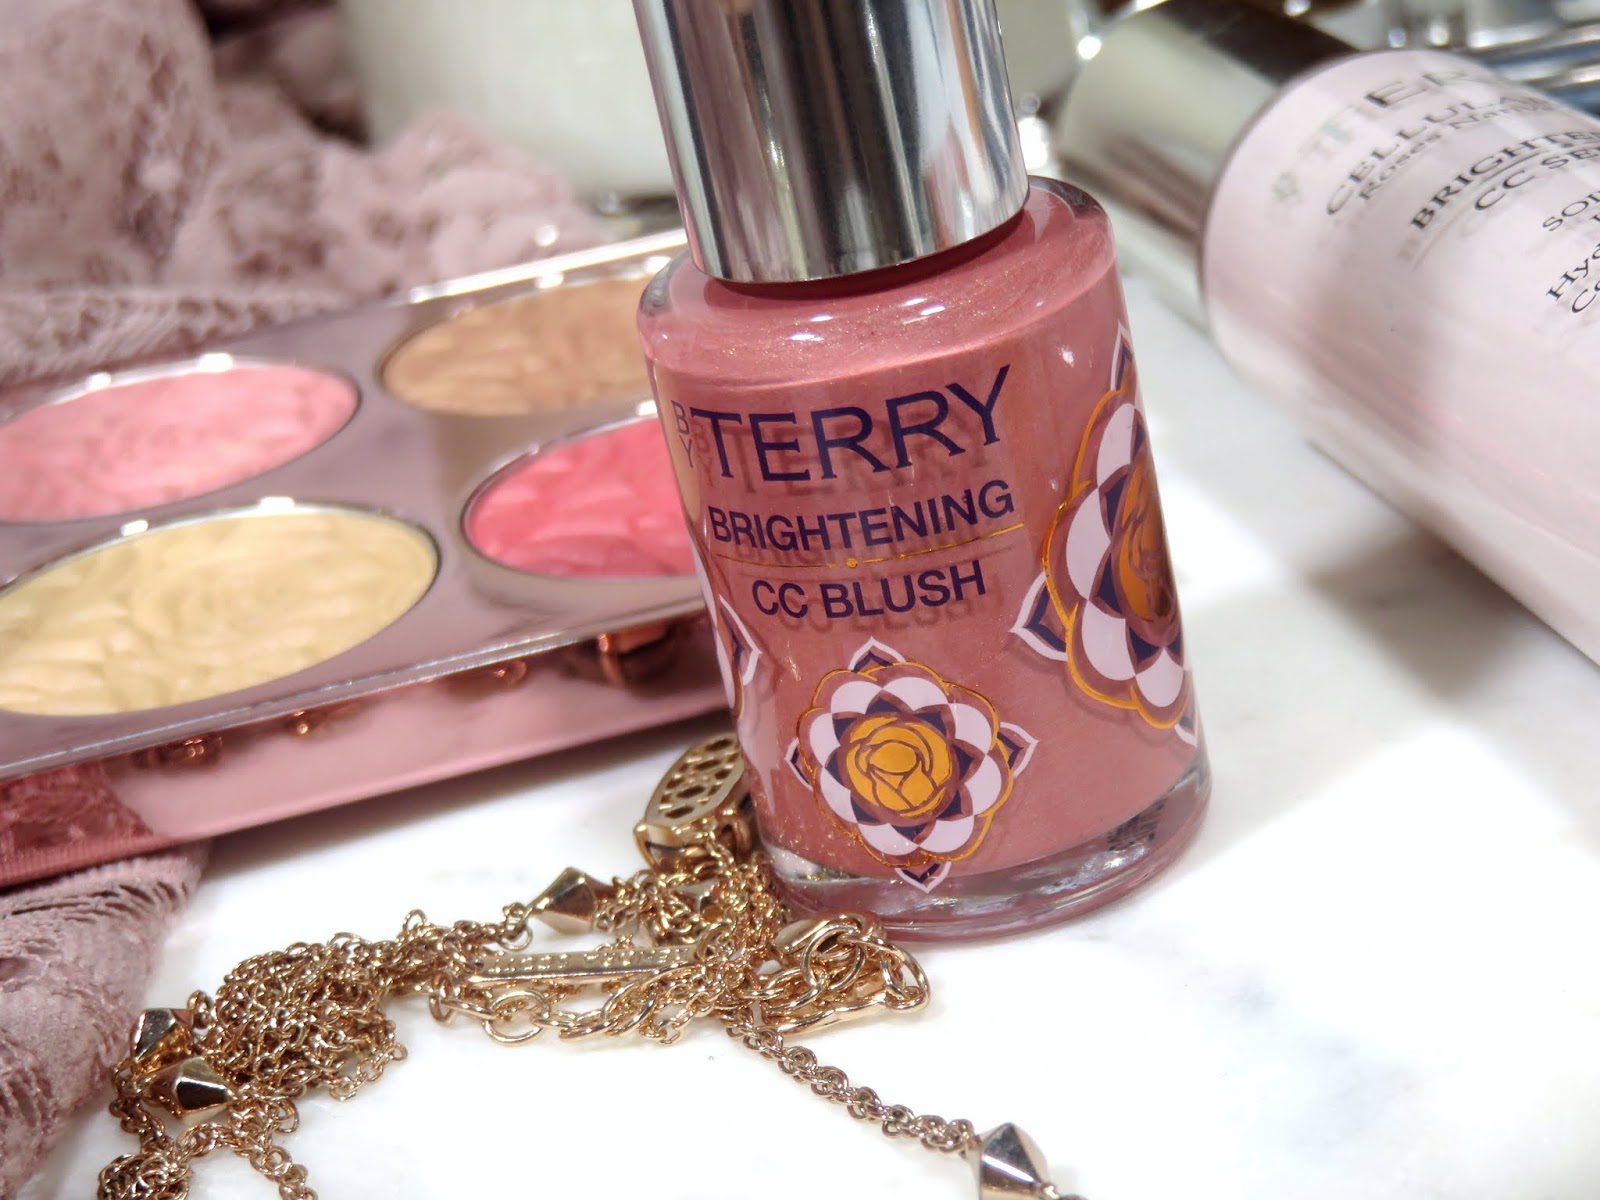 By Terry Brightening CC Blush Illuminating Blusher Review and Swatches